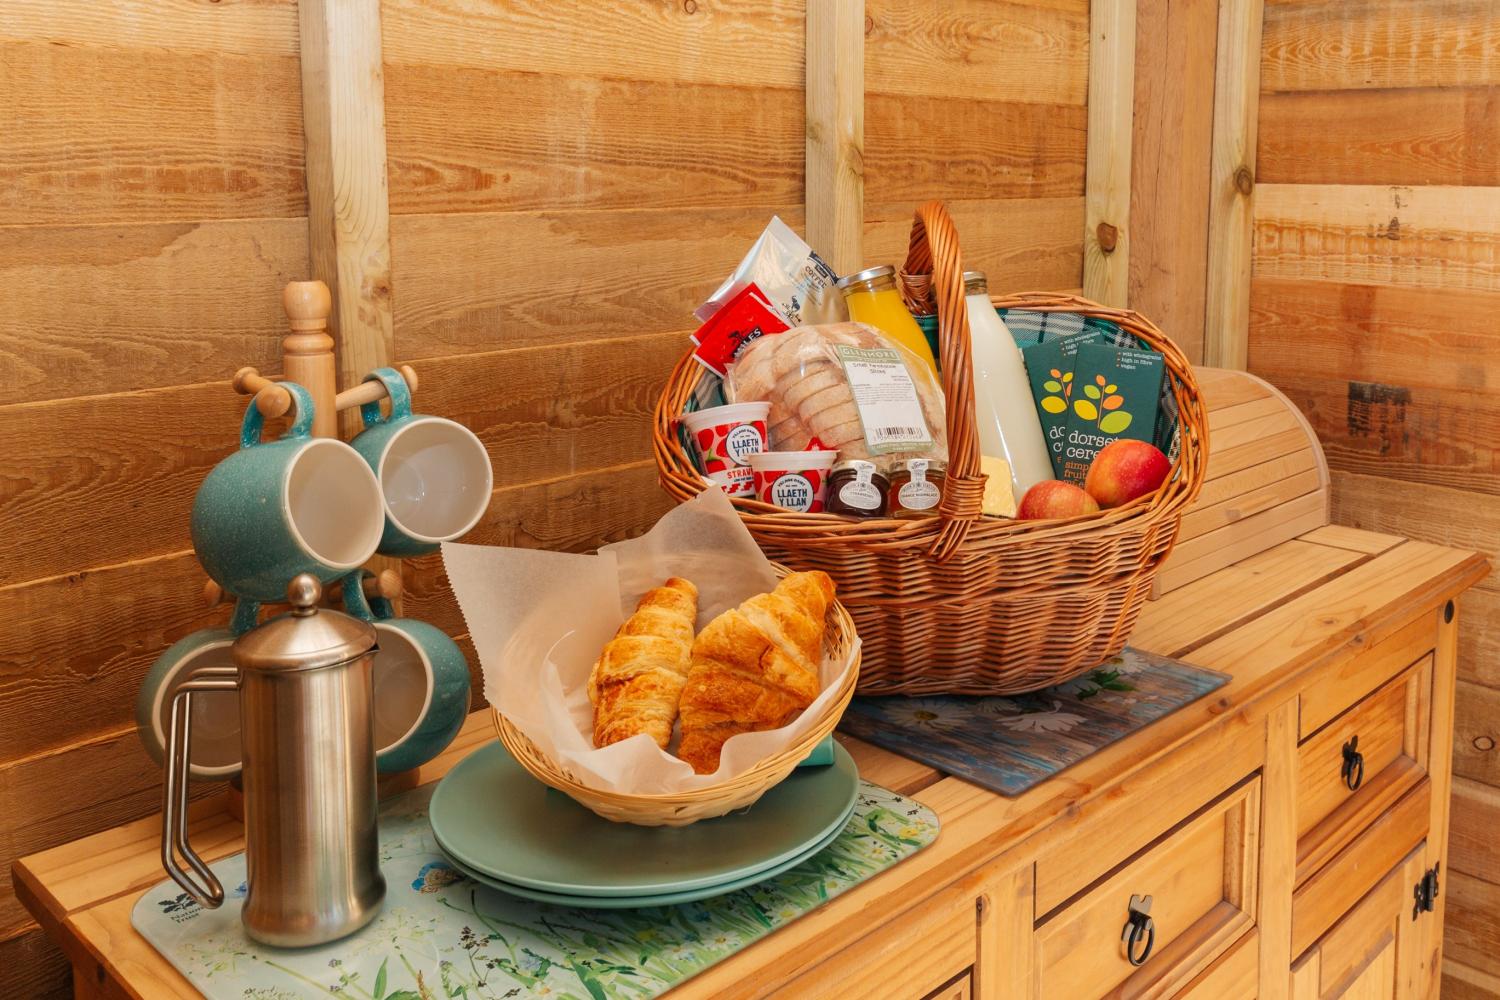 Breakfast Hamper available for extra charge